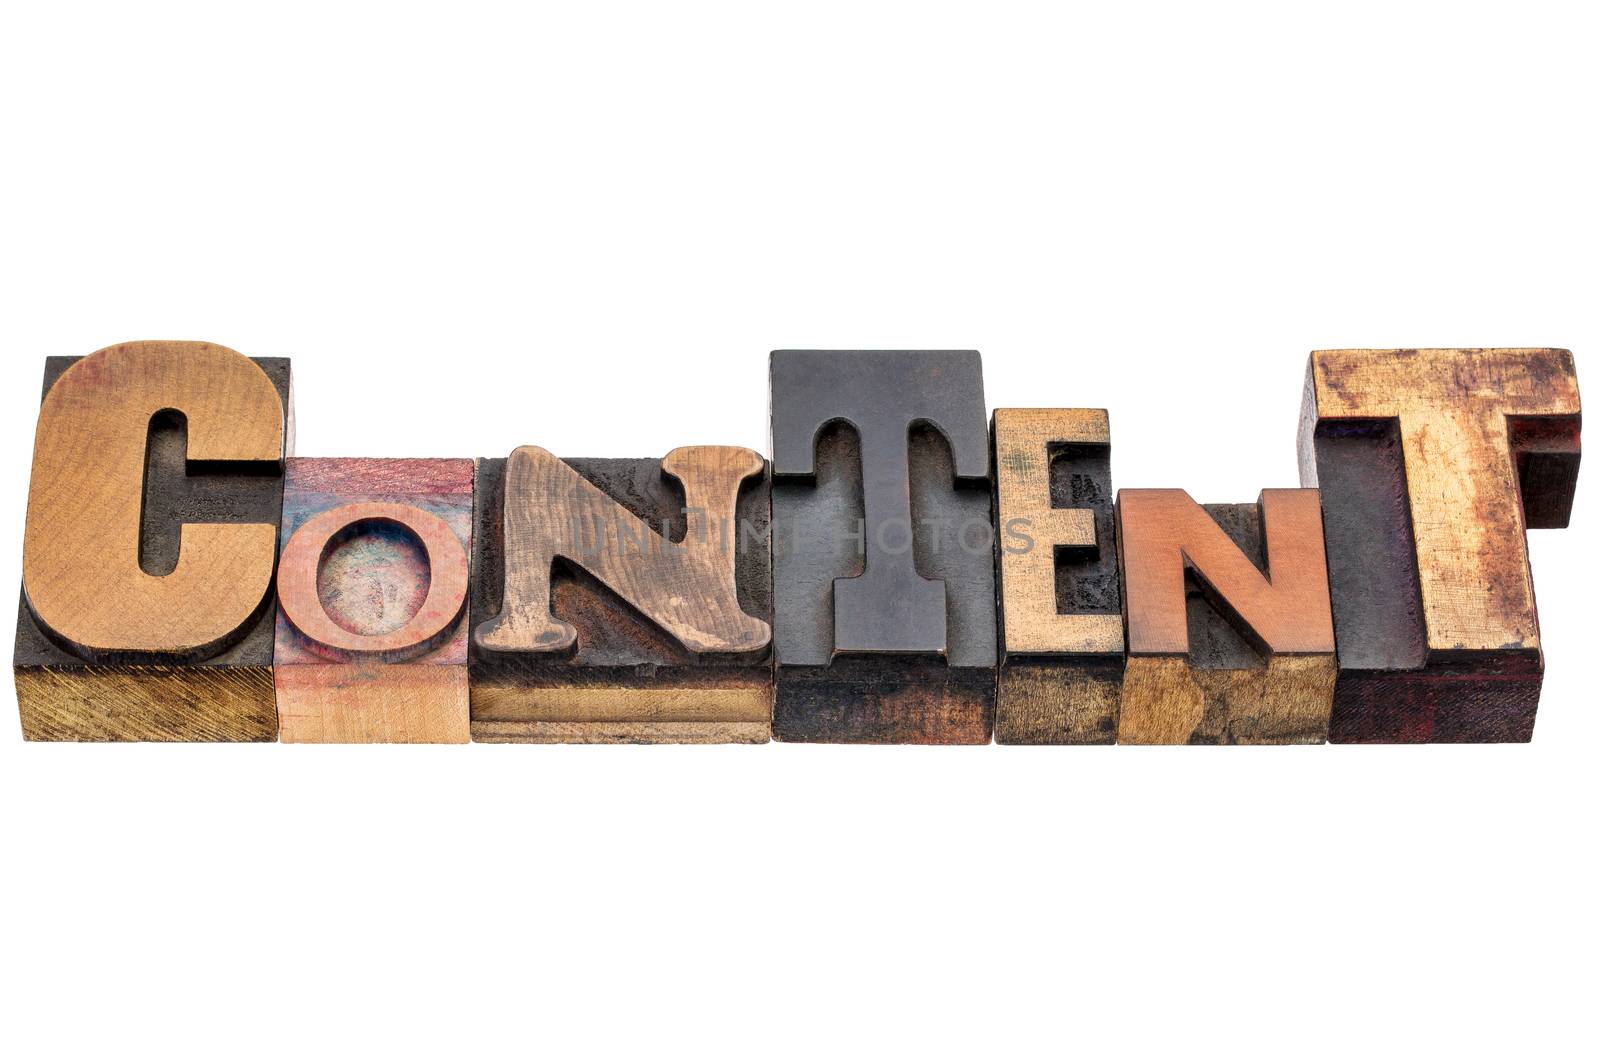 content word in mixed wood type by PixelsAway